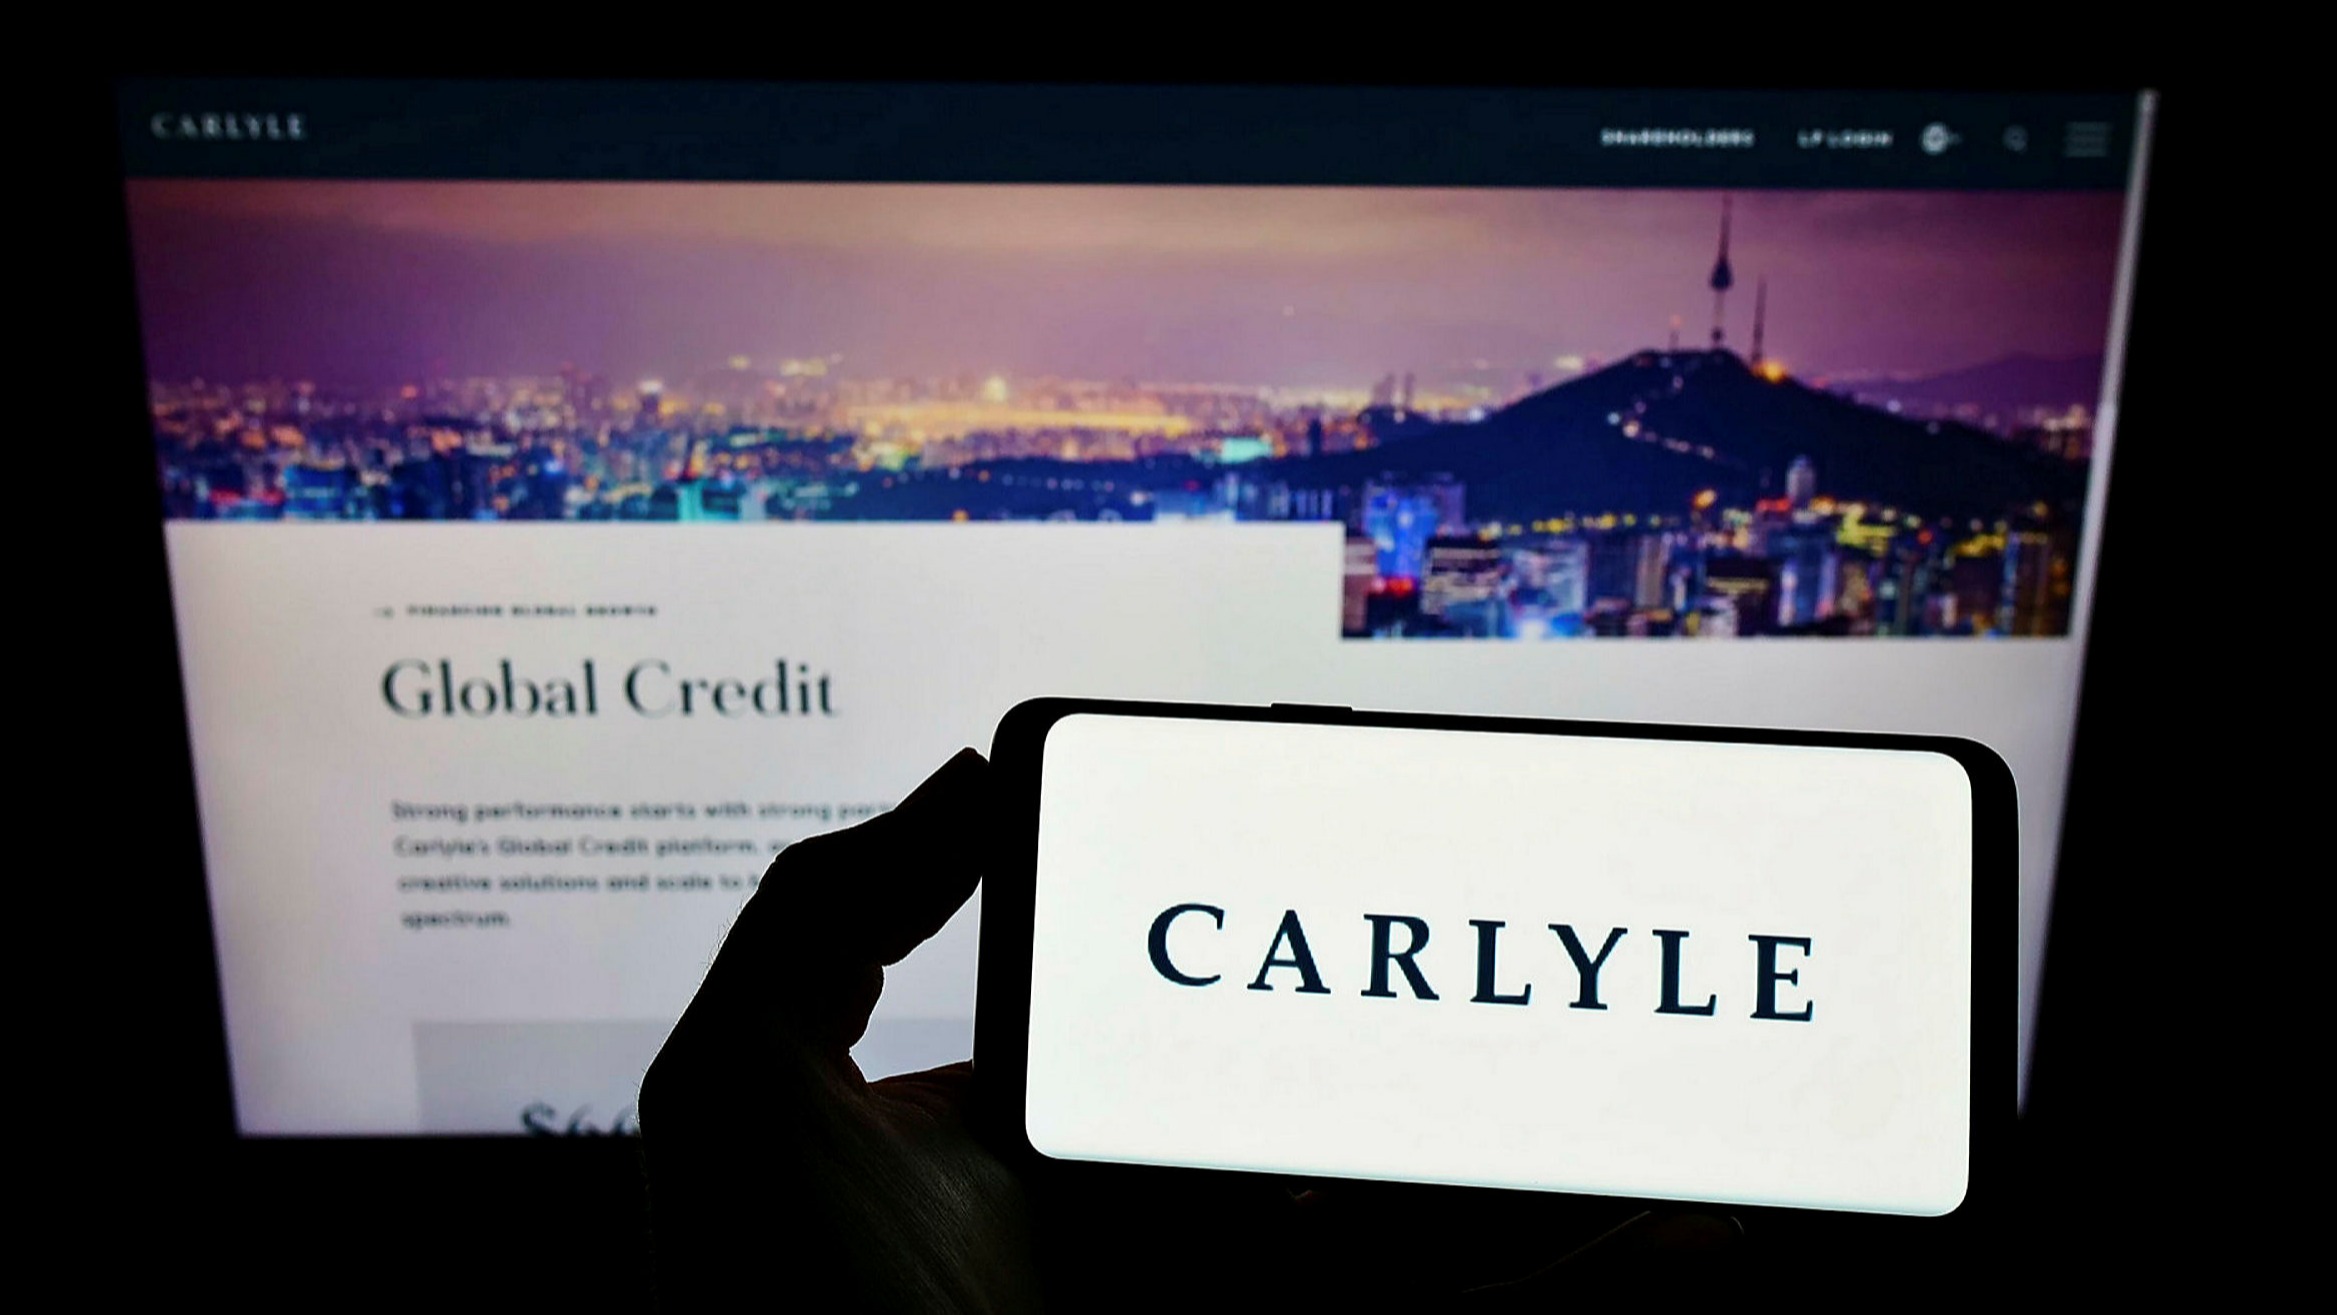 Carlyle plans M&A for growth after record earnings | Financial Times